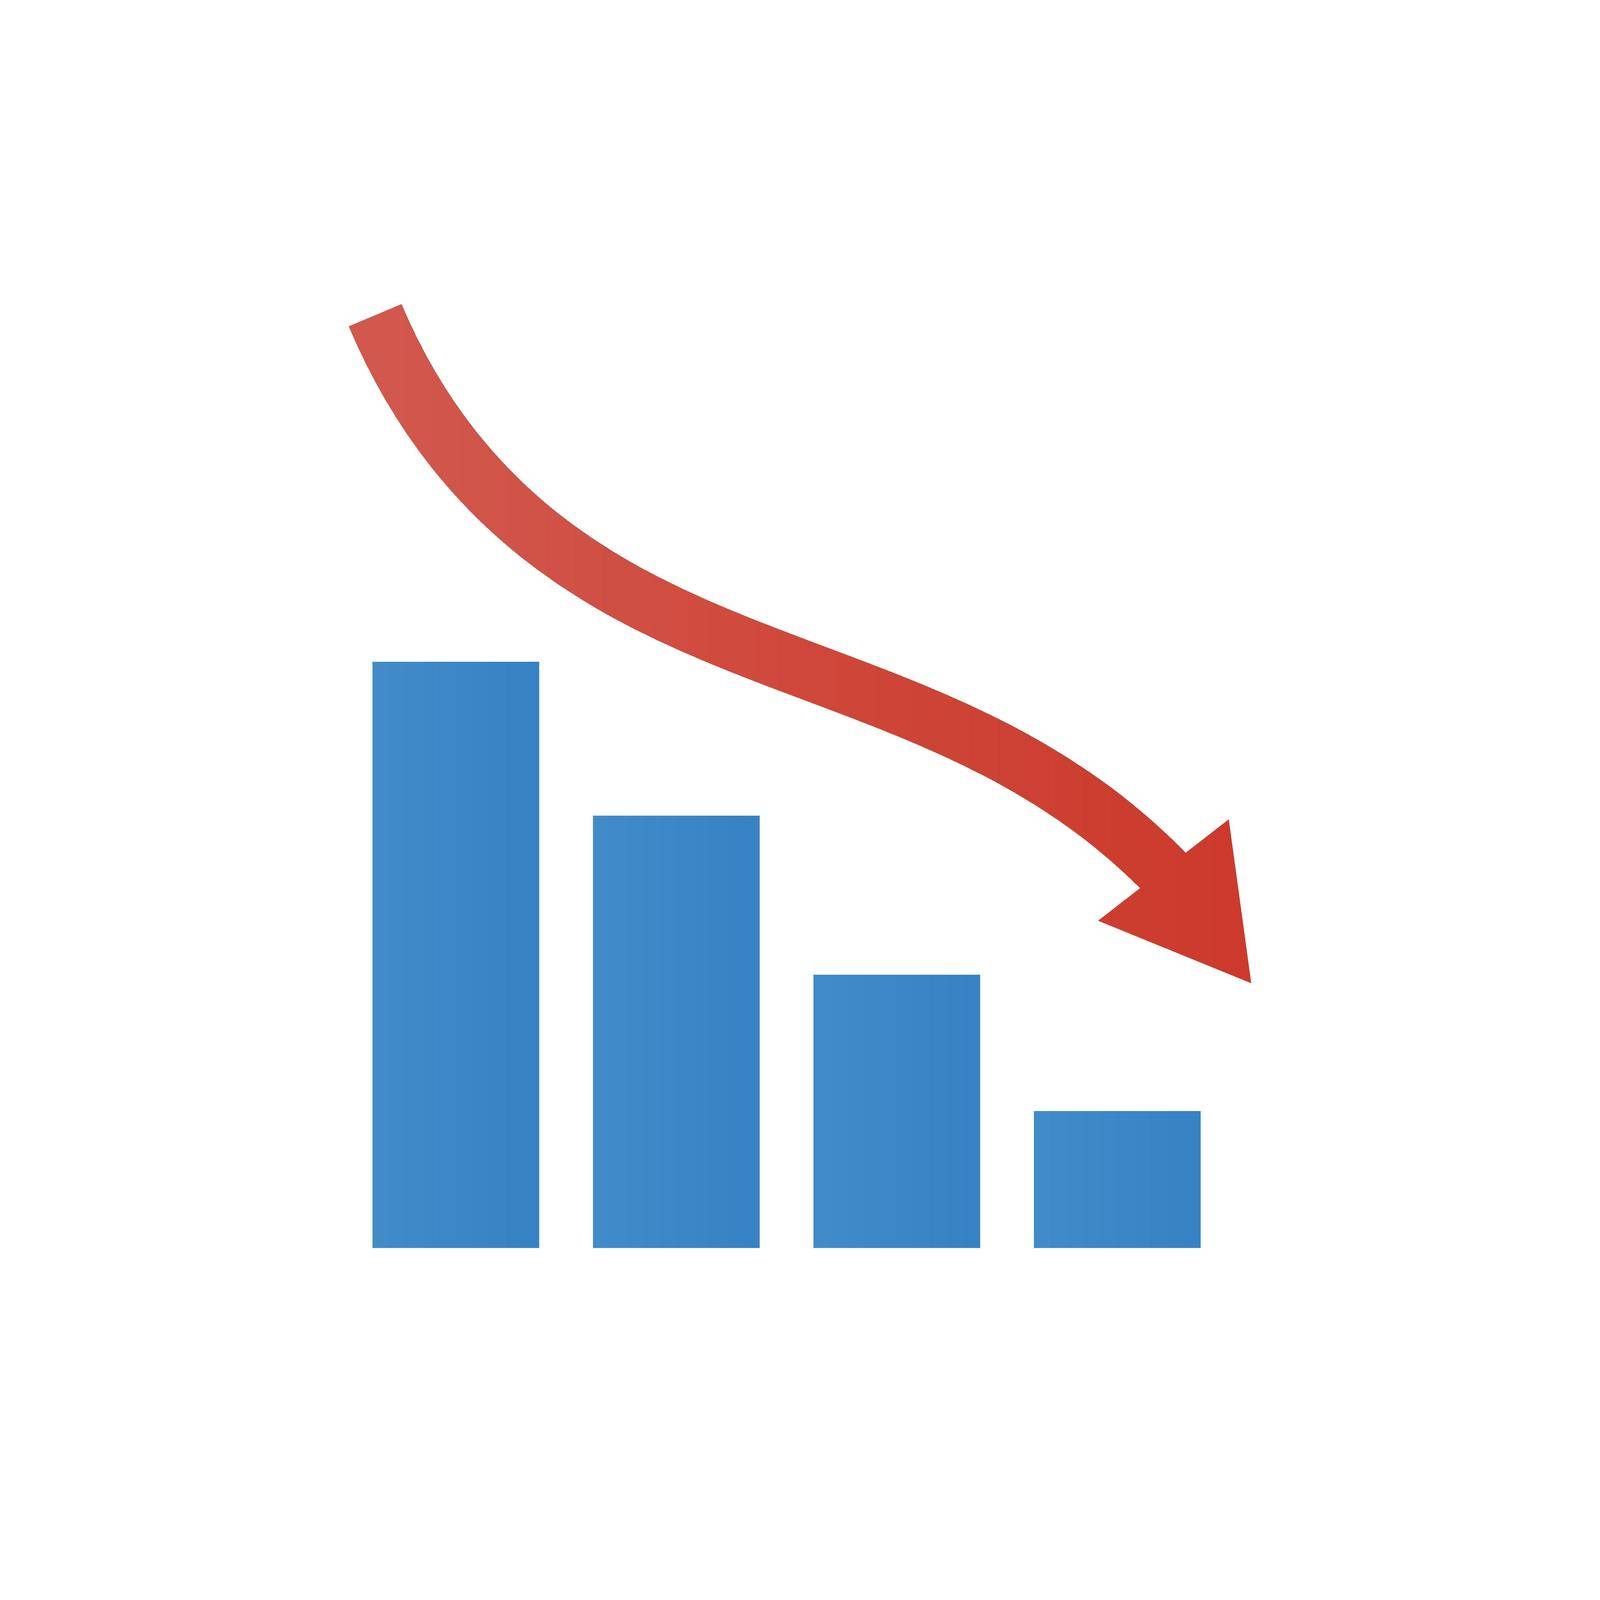 Decreasing arrow and bar graph icon. Decline in business performance. Vector. by illust_monster